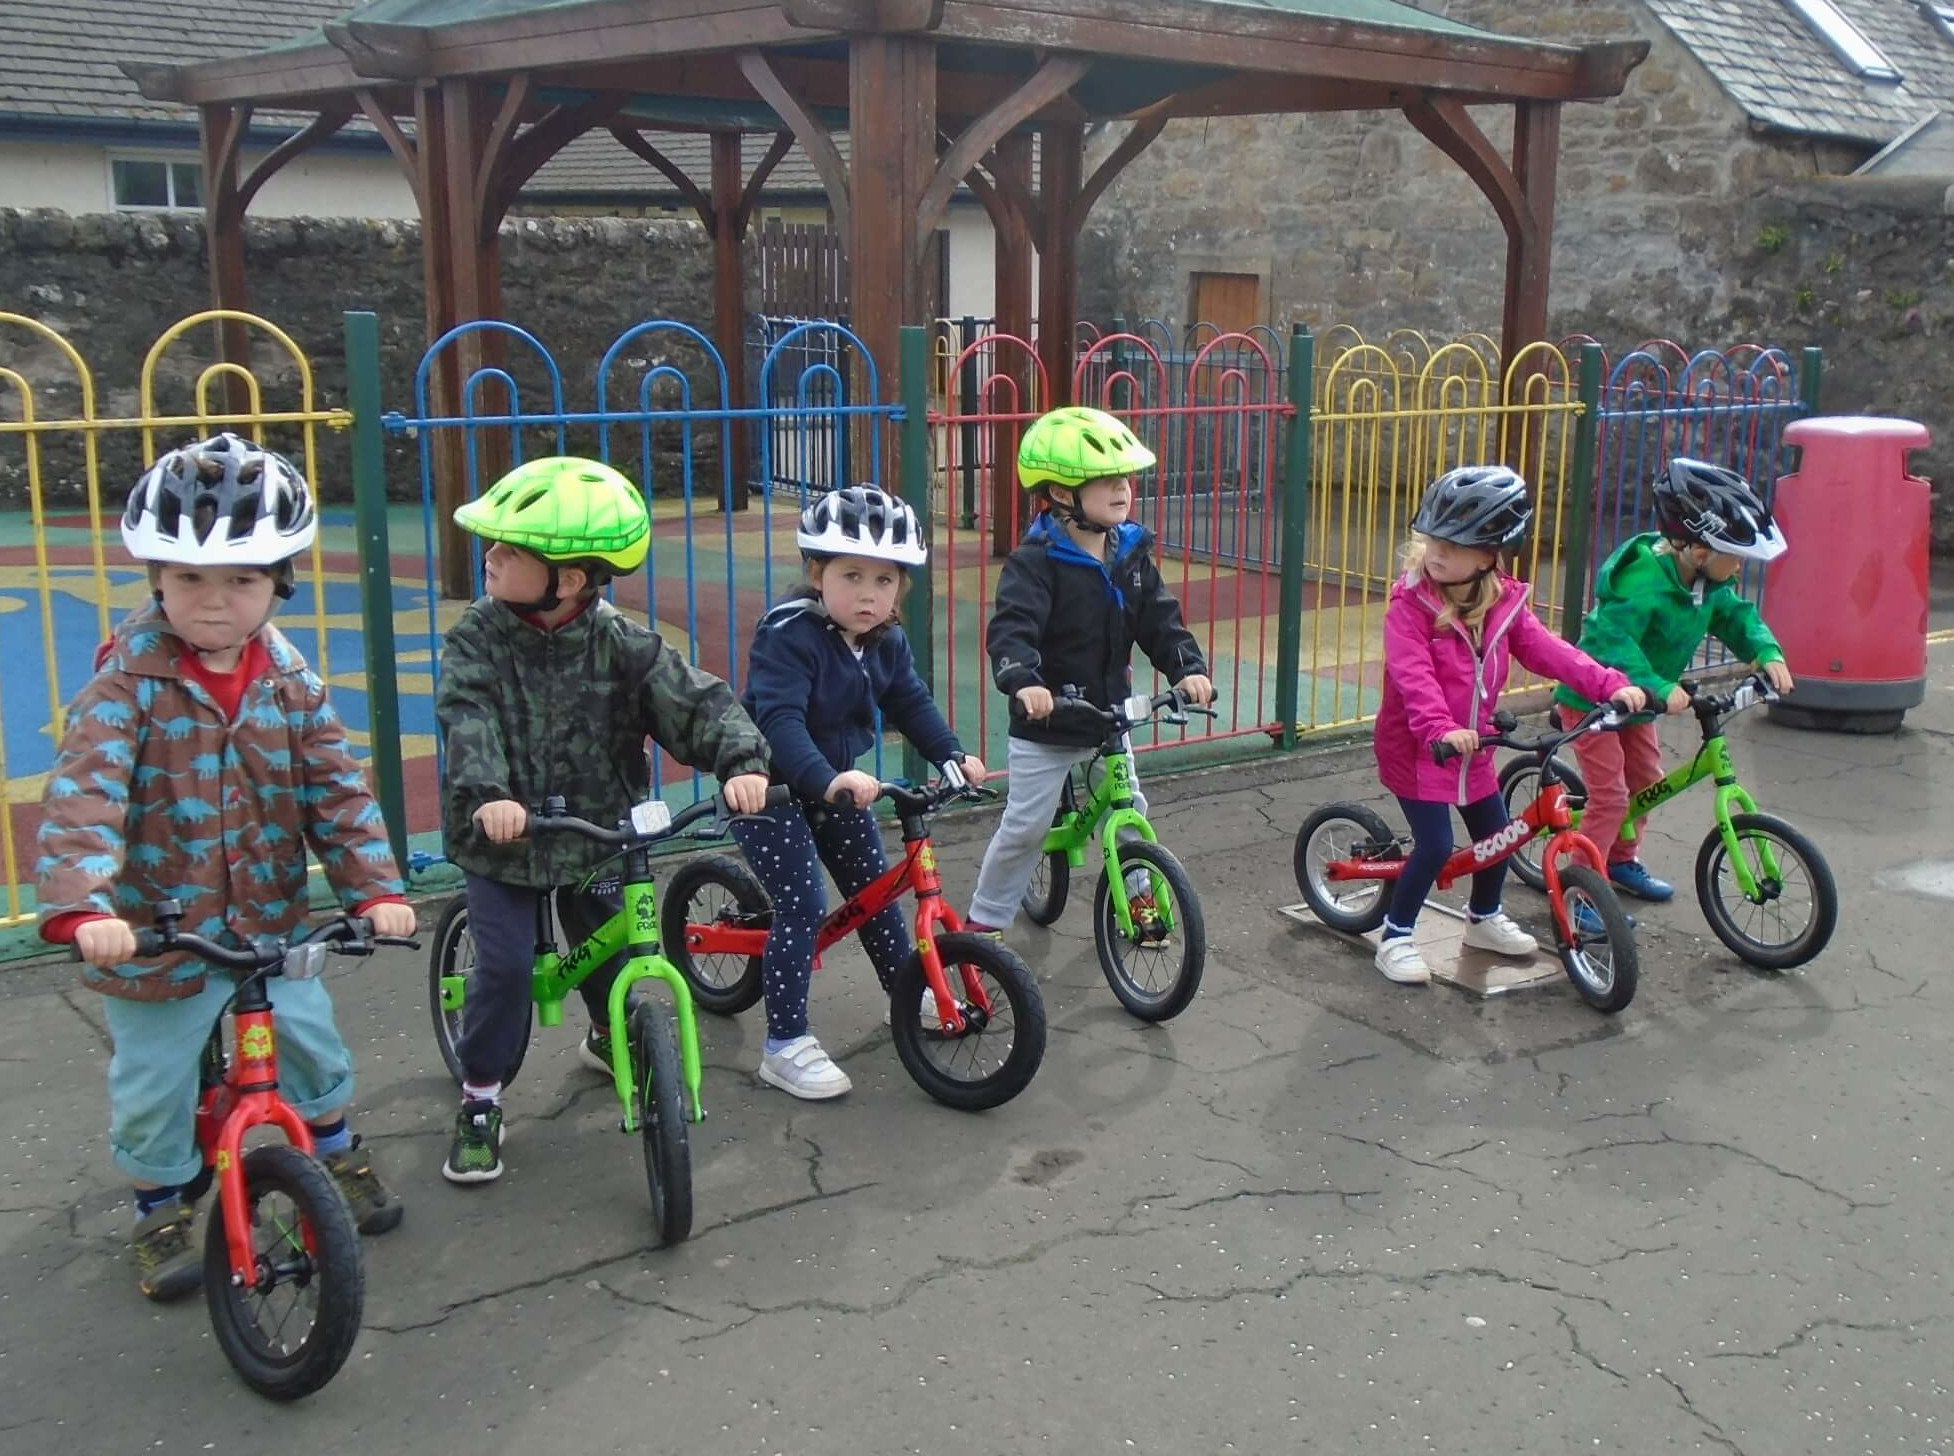 The balance bikes in use 